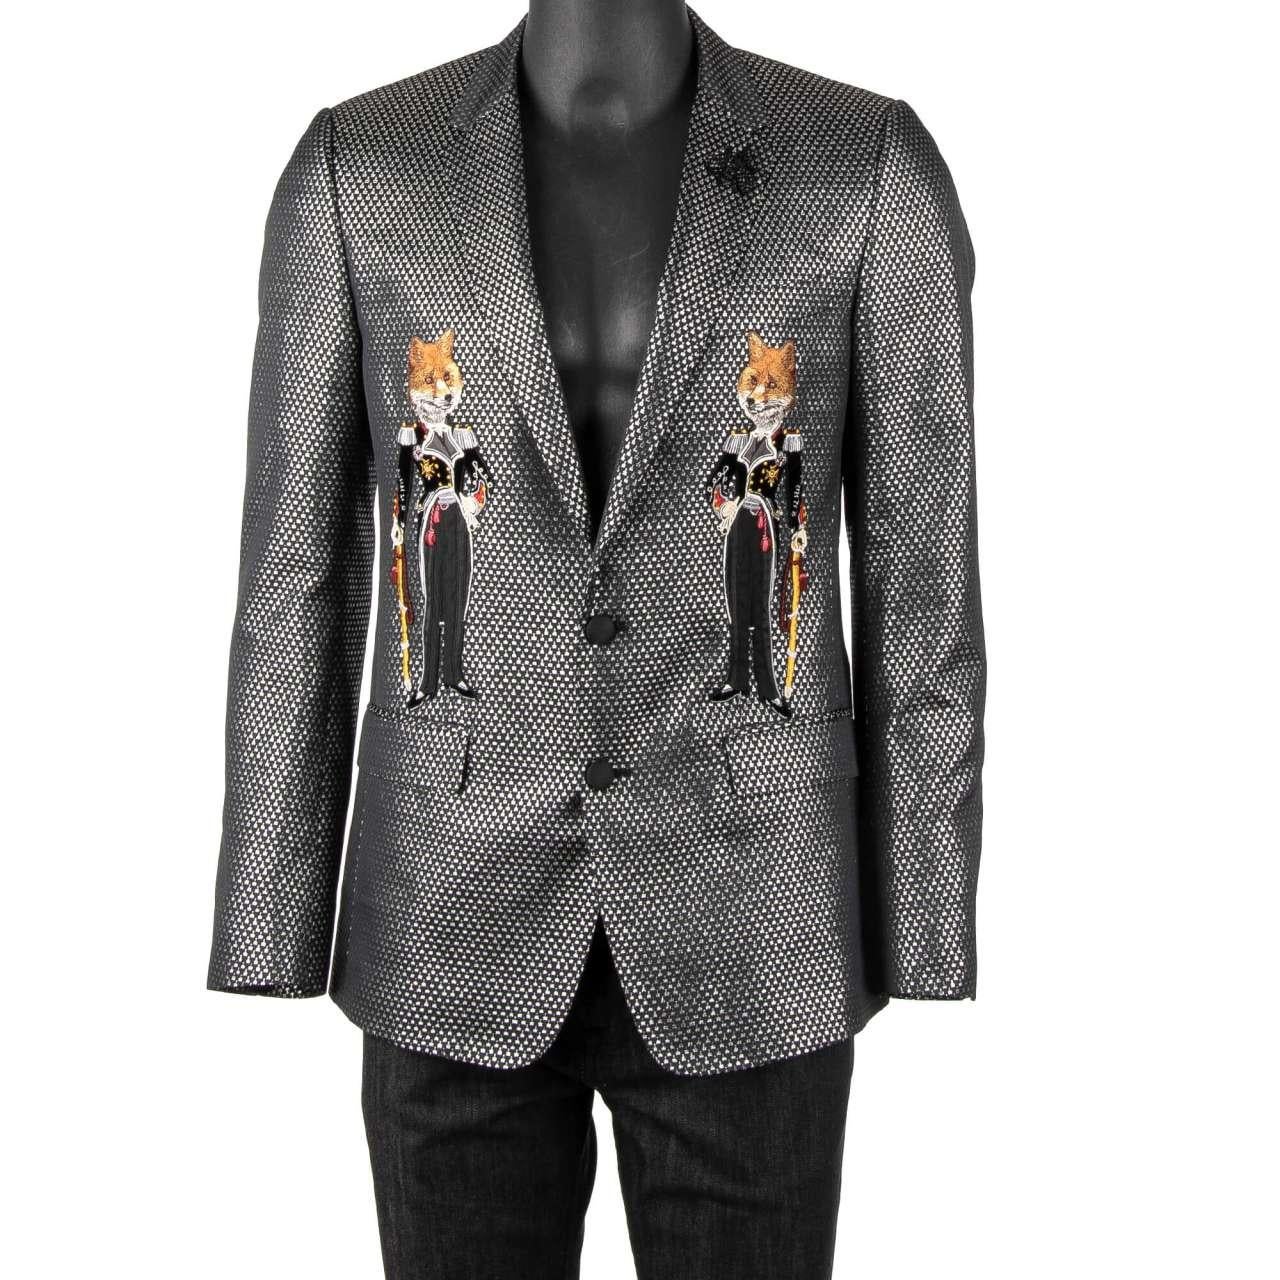 D&G Lurex Tuxedo Blazer MARTINI with Foxes and Bee Embroidery Silver 44 In Excellent Condition For Sale In Erkrath, DE